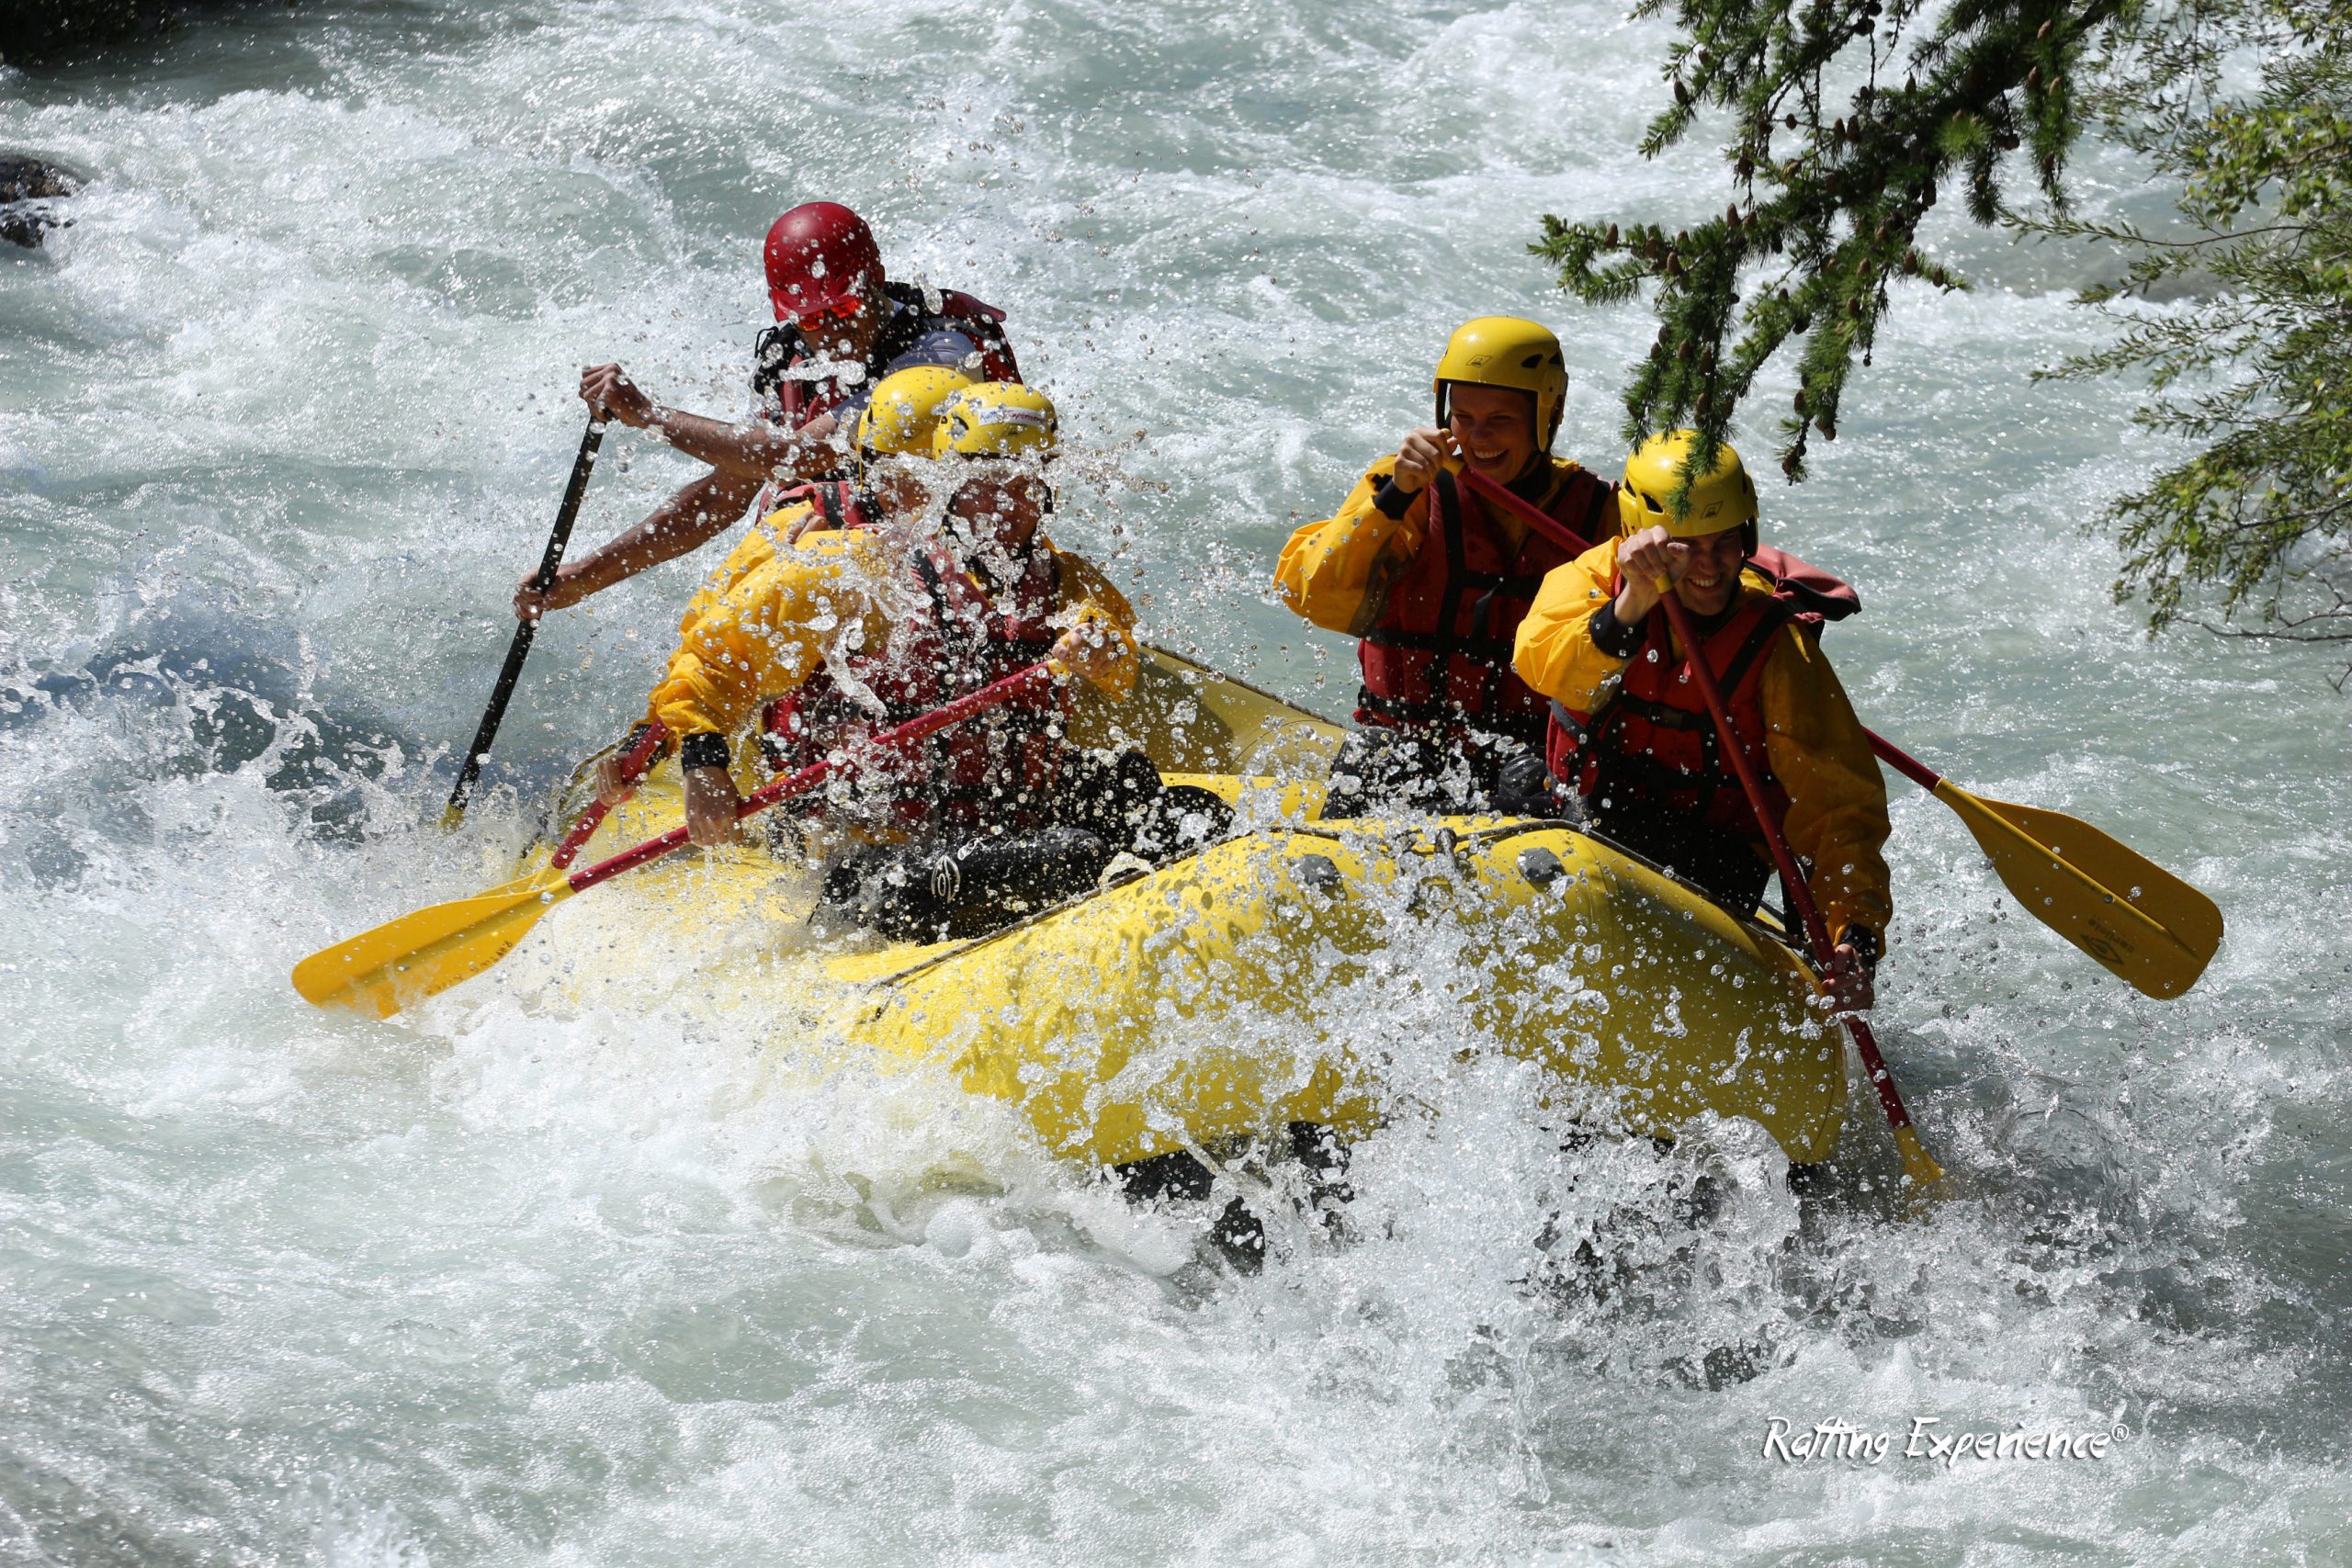 the classic white water rafting descent in briancon serrechevalier french alps